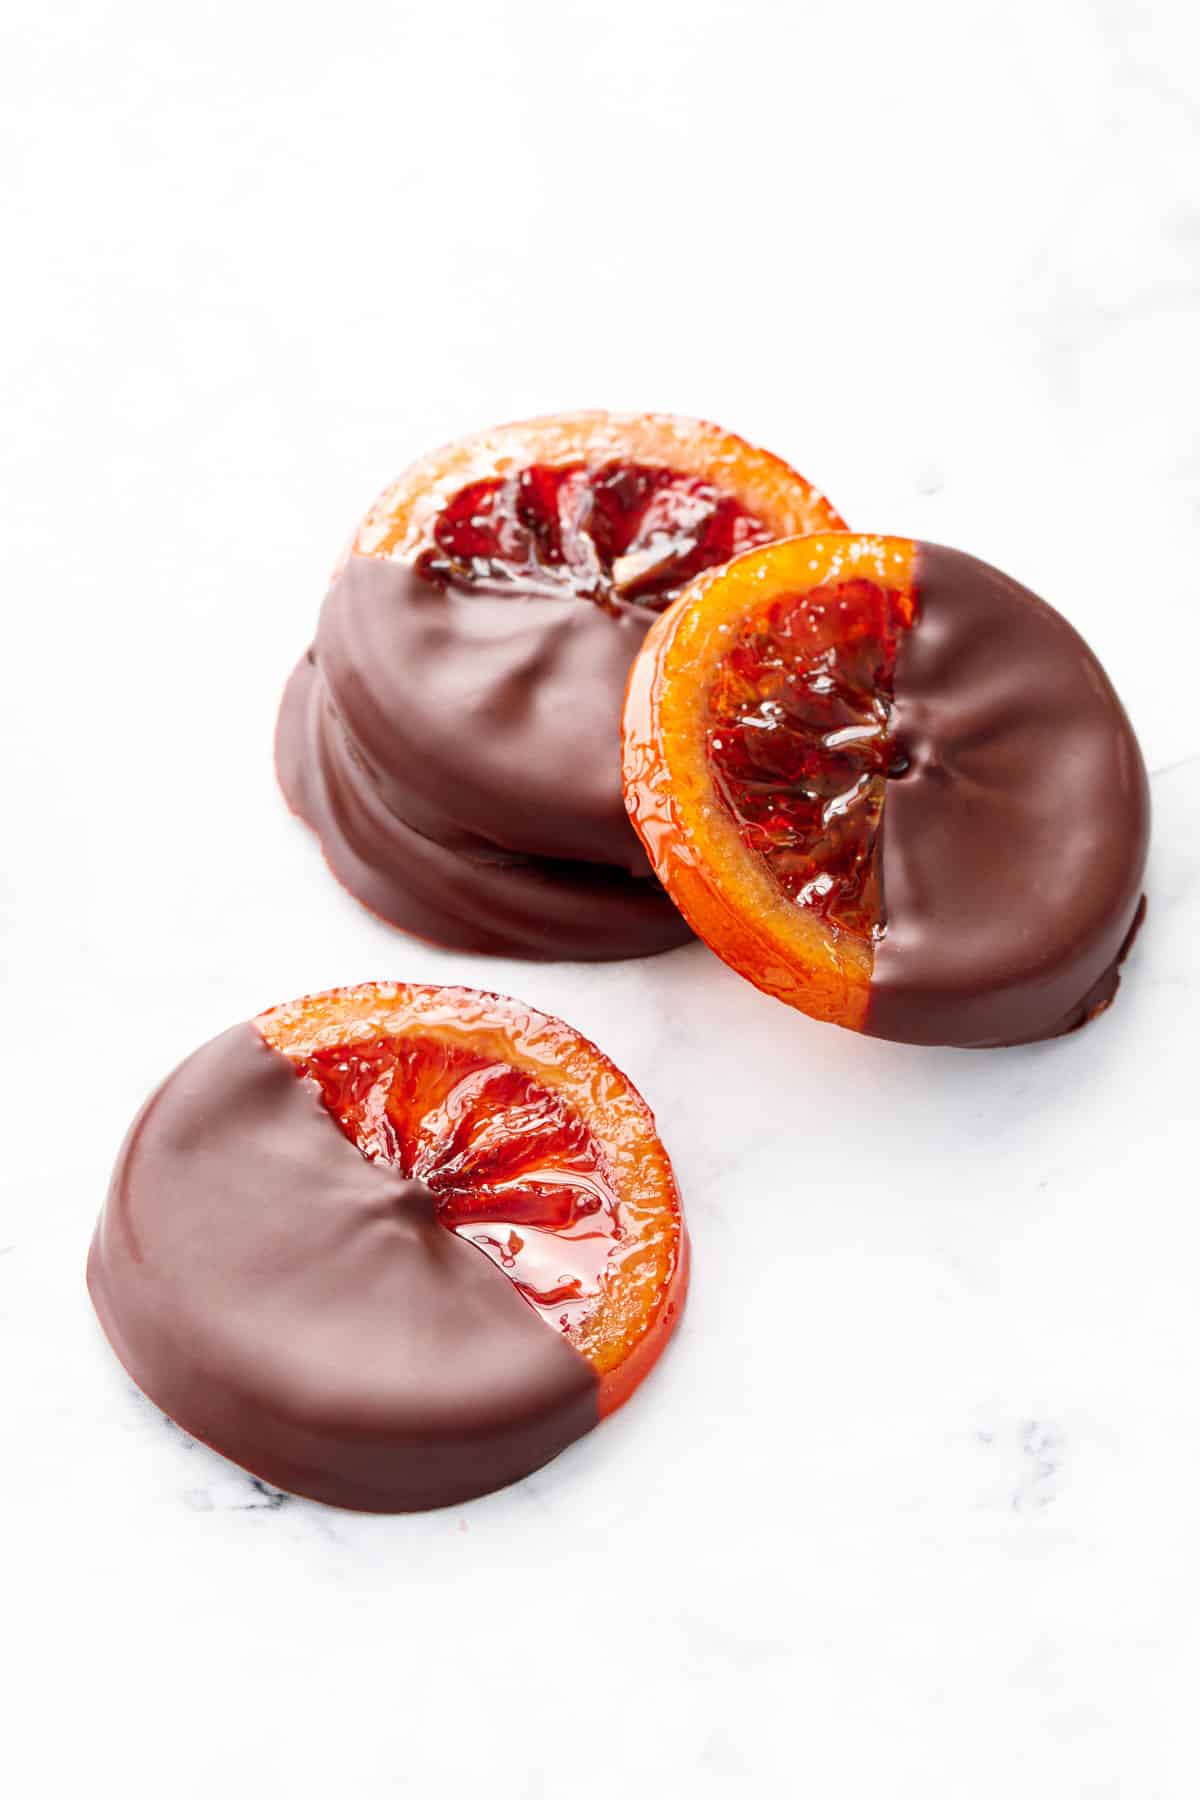 Pile of Candied Blood Orange Slices dipped in dark chocolate, on a marble background.